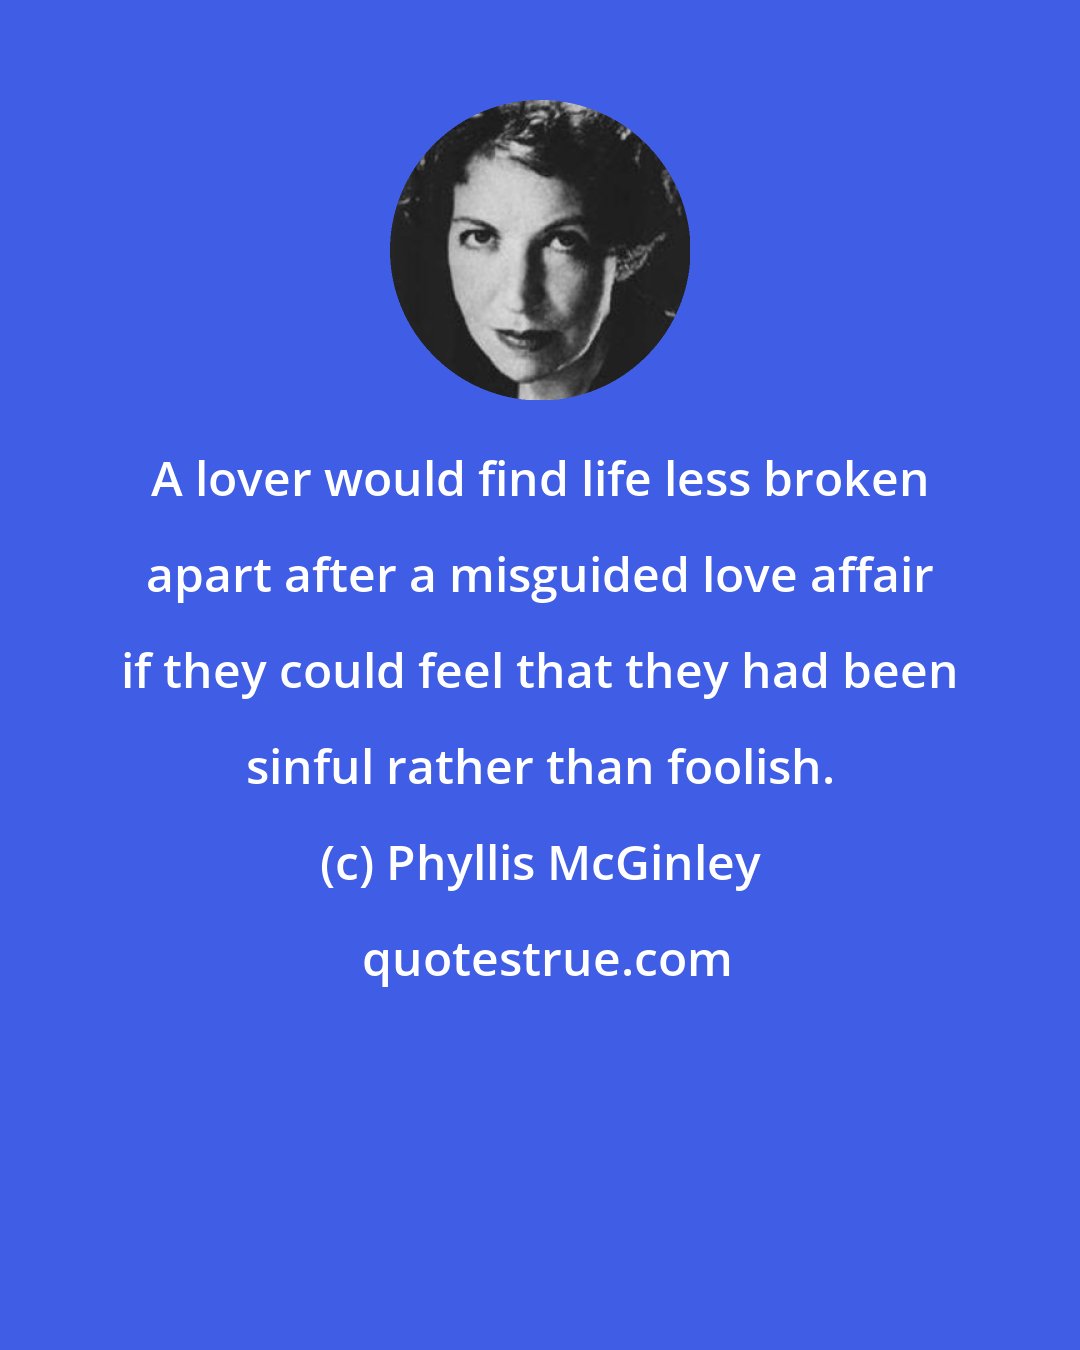 Phyllis McGinley: A lover would find life less broken apart after a misguided love affair if they could feel that they had been sinful rather than foolish.